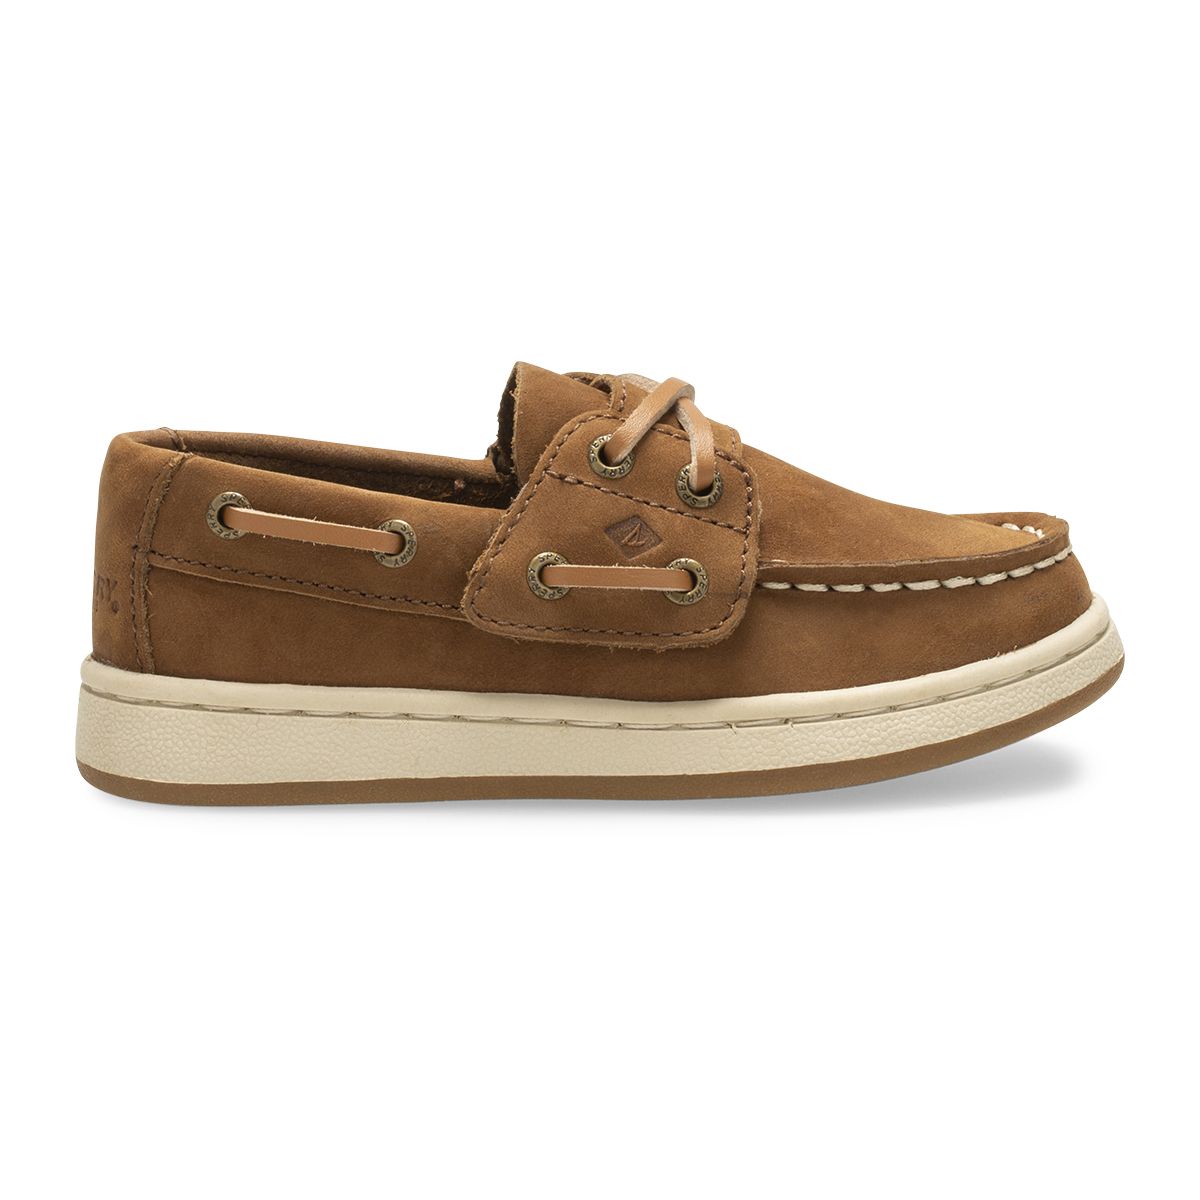 Sperry, Shoes, Sperrycruise Brown Sneakers Shoes Boys Size 6 M Womens  Size 8 Replacement Laces